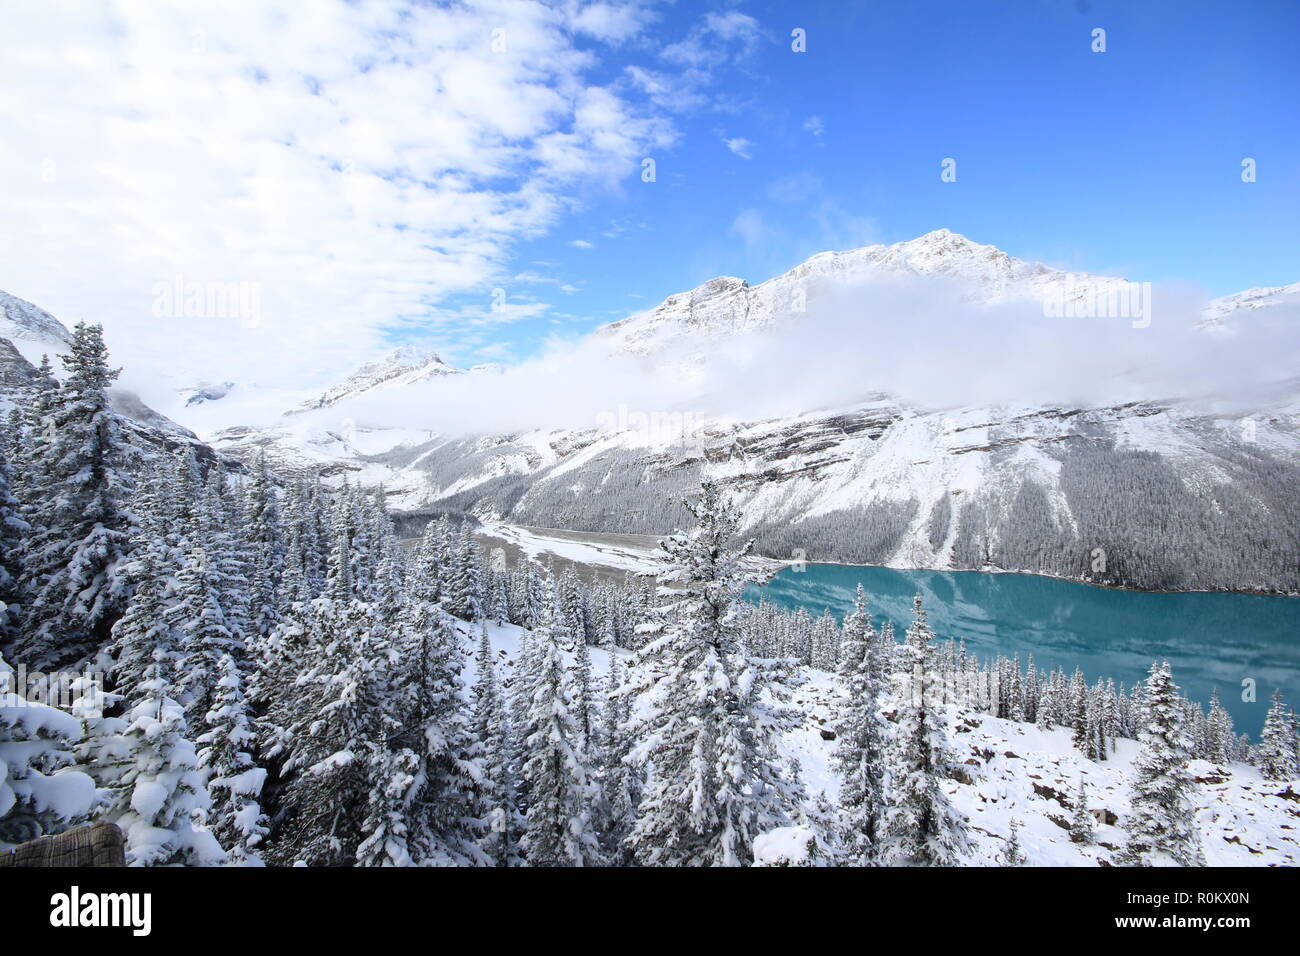 Spectacular winter scene at Peyto Lake in Banff National Park, Canada, with mountains and trees covered by snow.  Image of popular tour attraction. Stock Photo